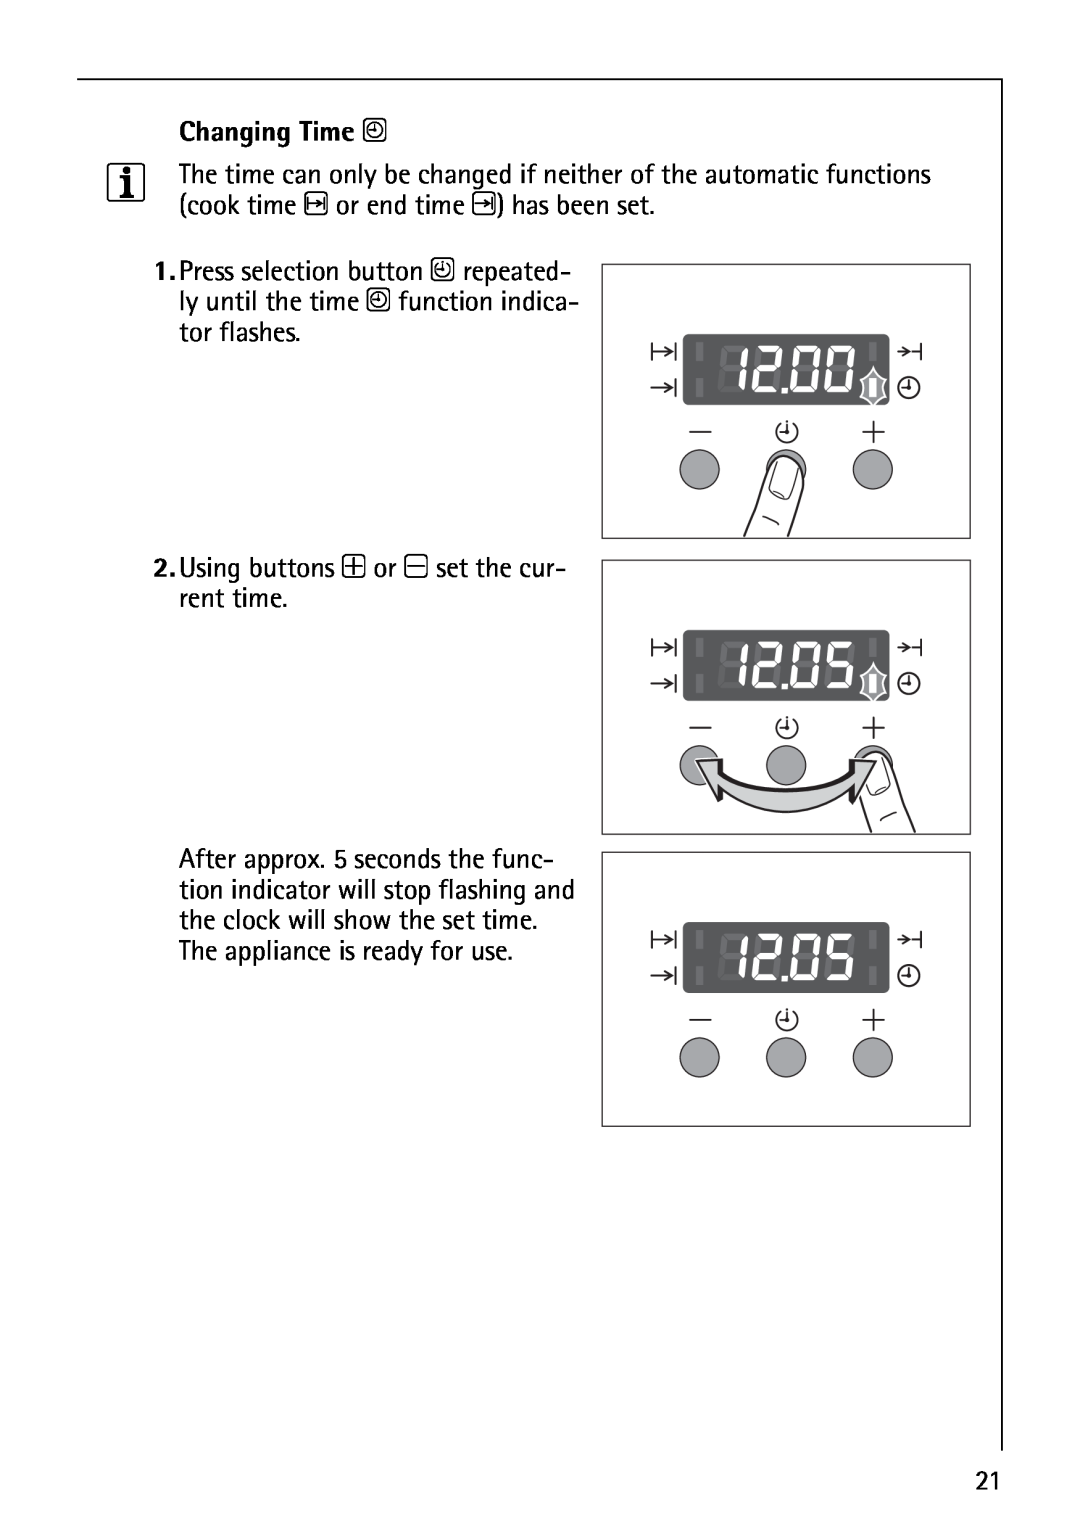 Electrolux B1100-3 manual Changing Time W, tor flashes 2. Using buttons + or - set the cur- rent time 